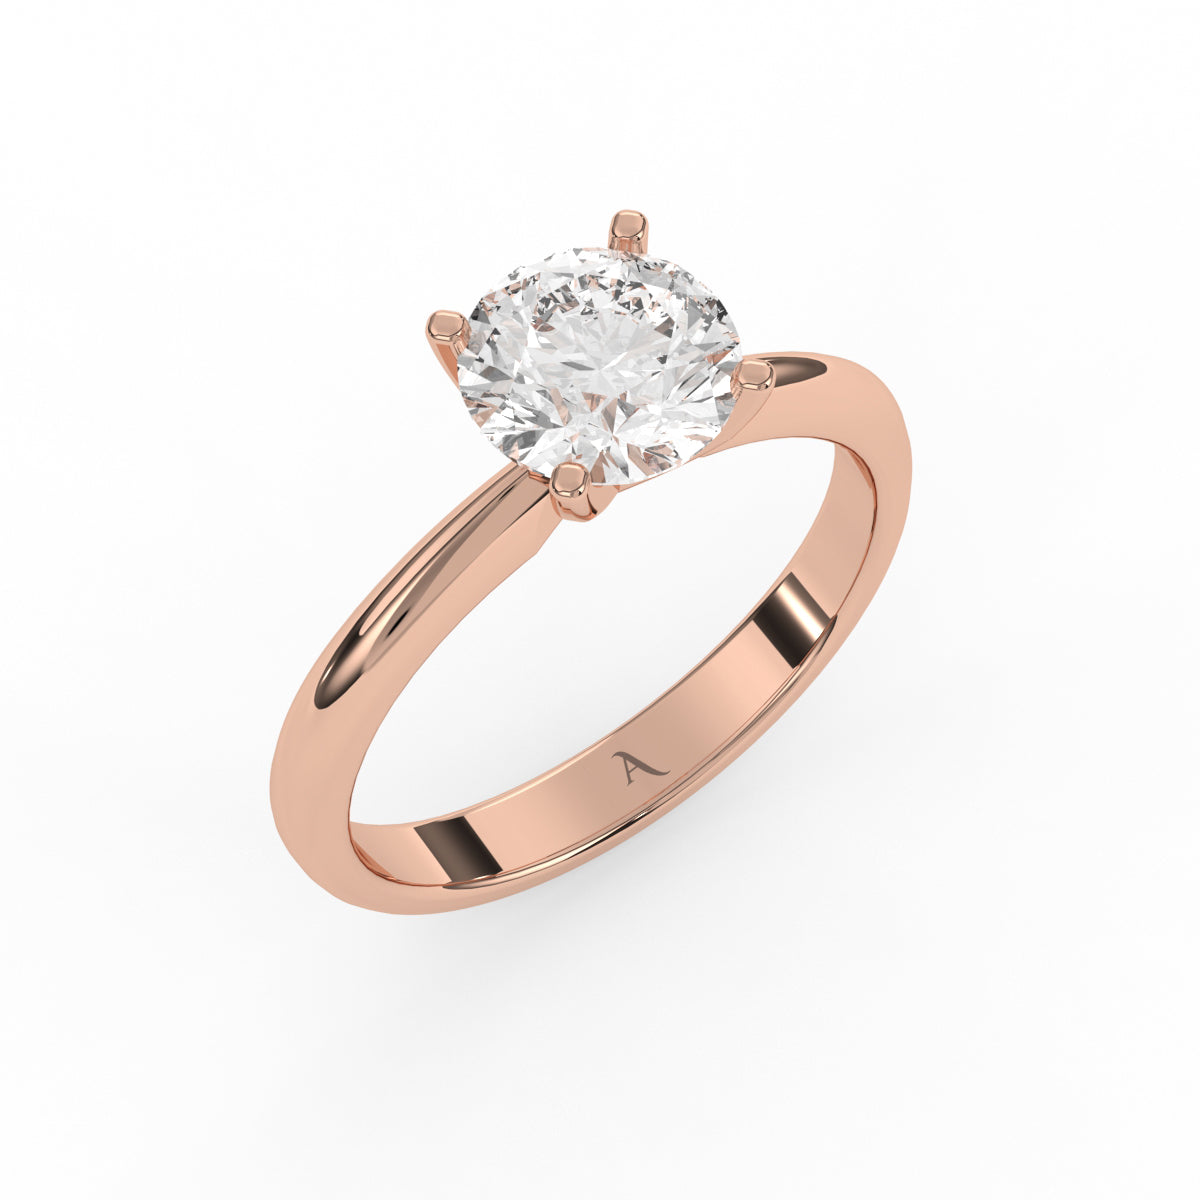 Round solitaire ring